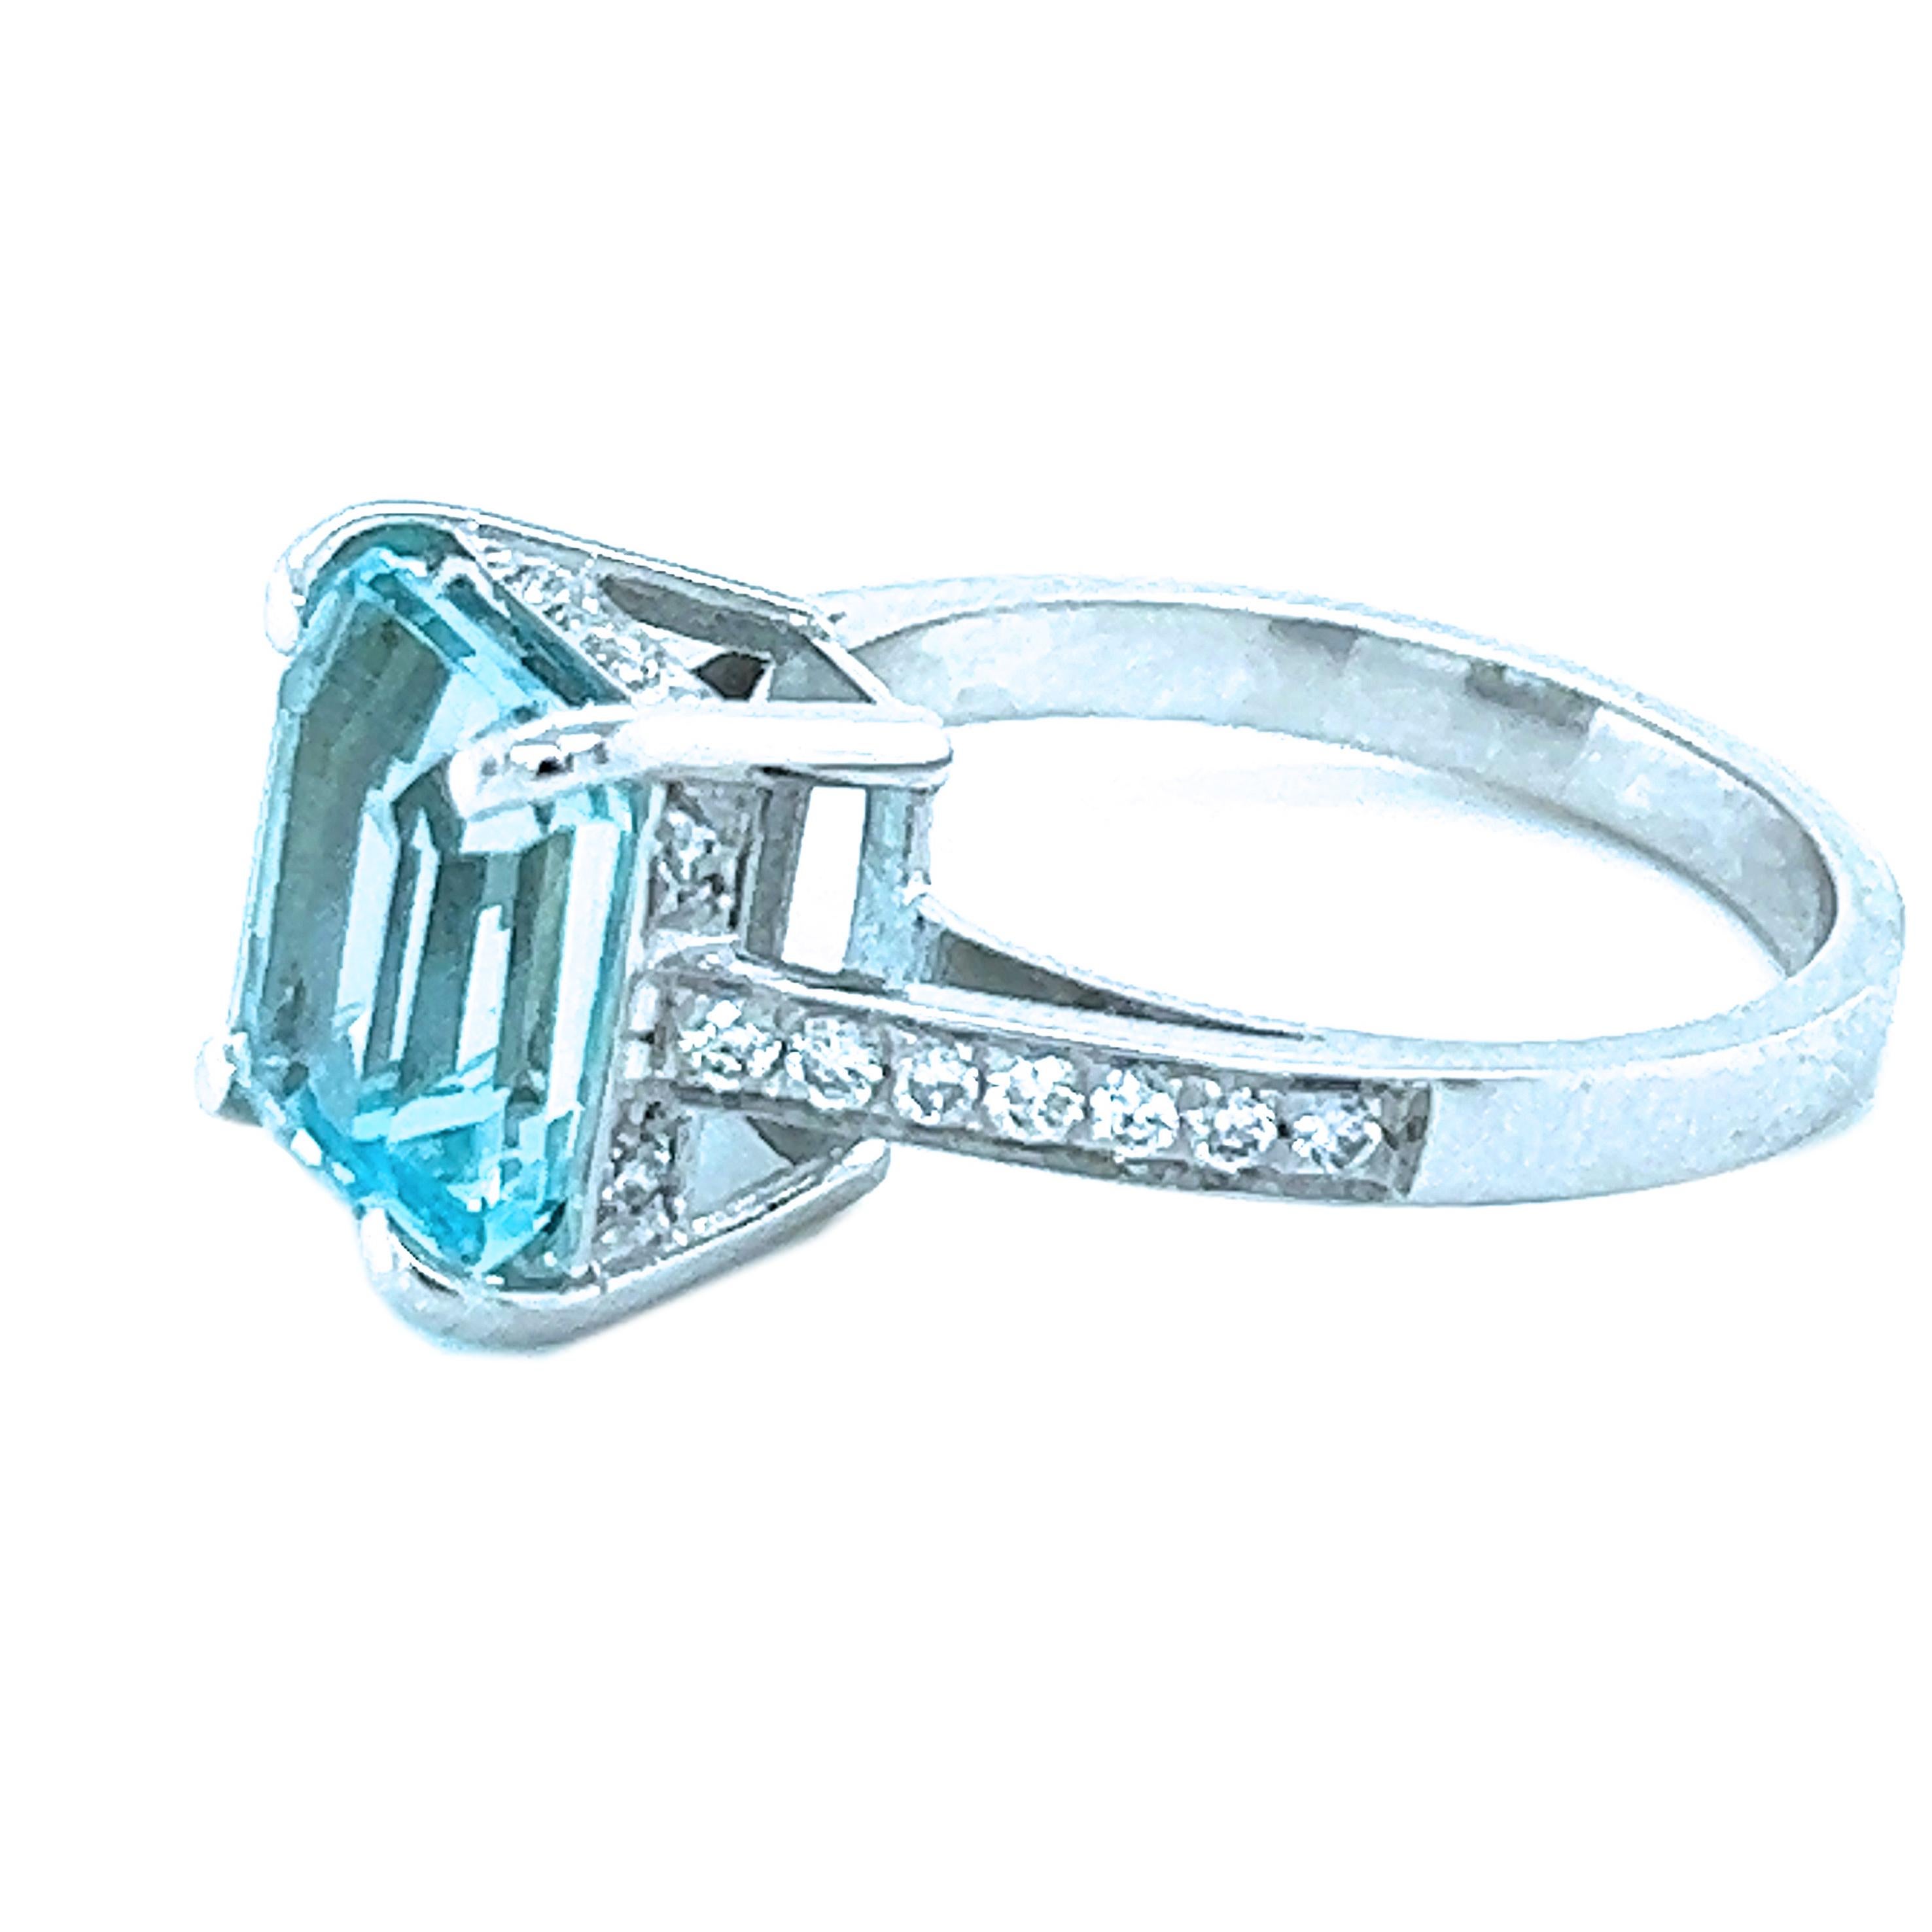 One-of-a-kind 3.11 Carat Emerald Cut Natural Brazilian Aquamarine(0.395in lenght 0.324in width, 10x8.24mm) in a Chic yet Timeless 0.46Kt Top Quality(D-E, IF) White Diamond 18Kt White Gold Setting: perfect as engagement as well as cocktail ring.
US